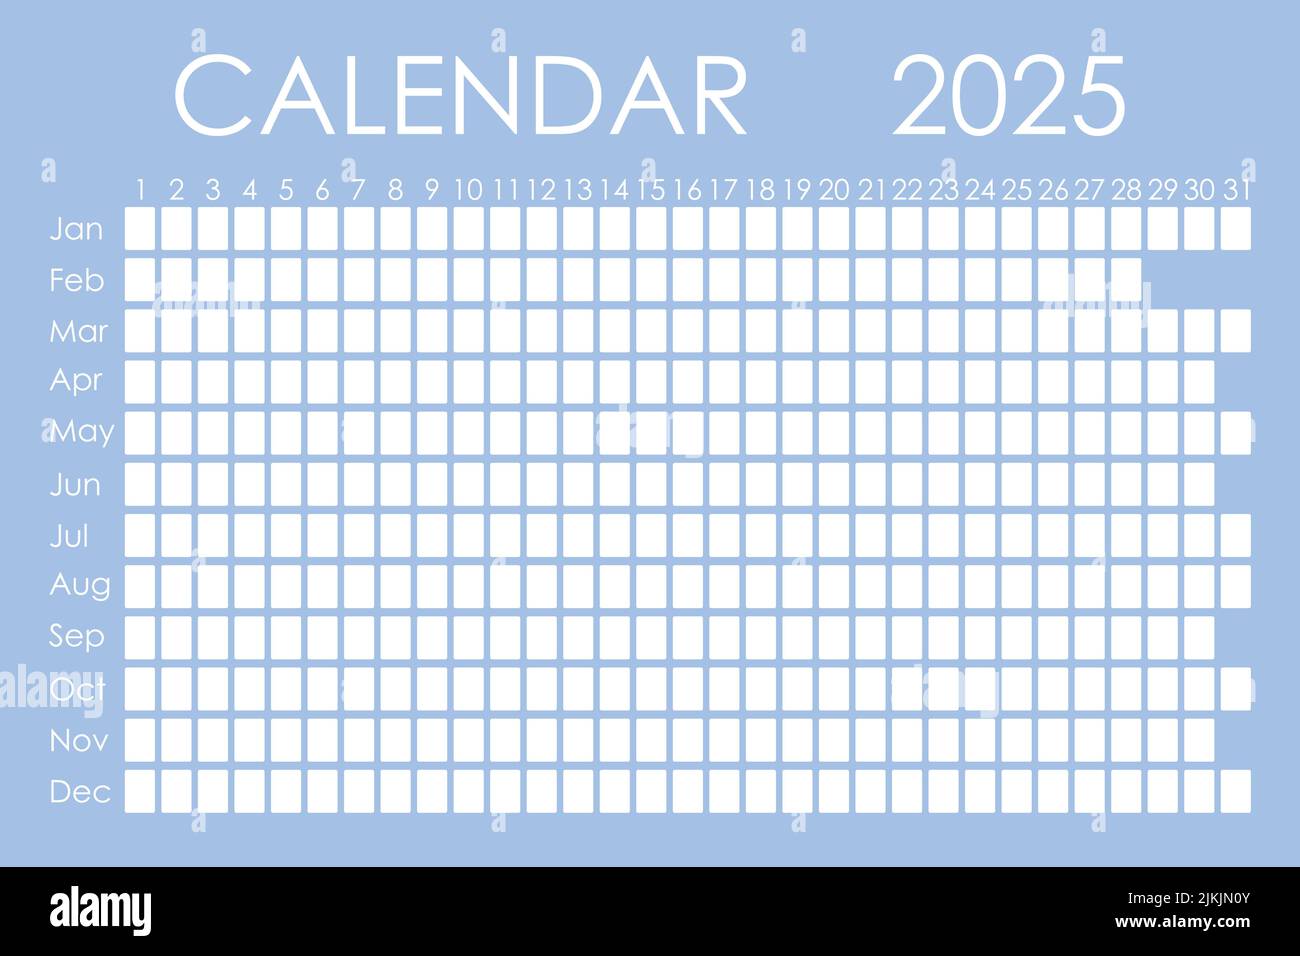 2025-calendar-planner-corporate-design-week-isolated-on-color-background-moon-calendar-place